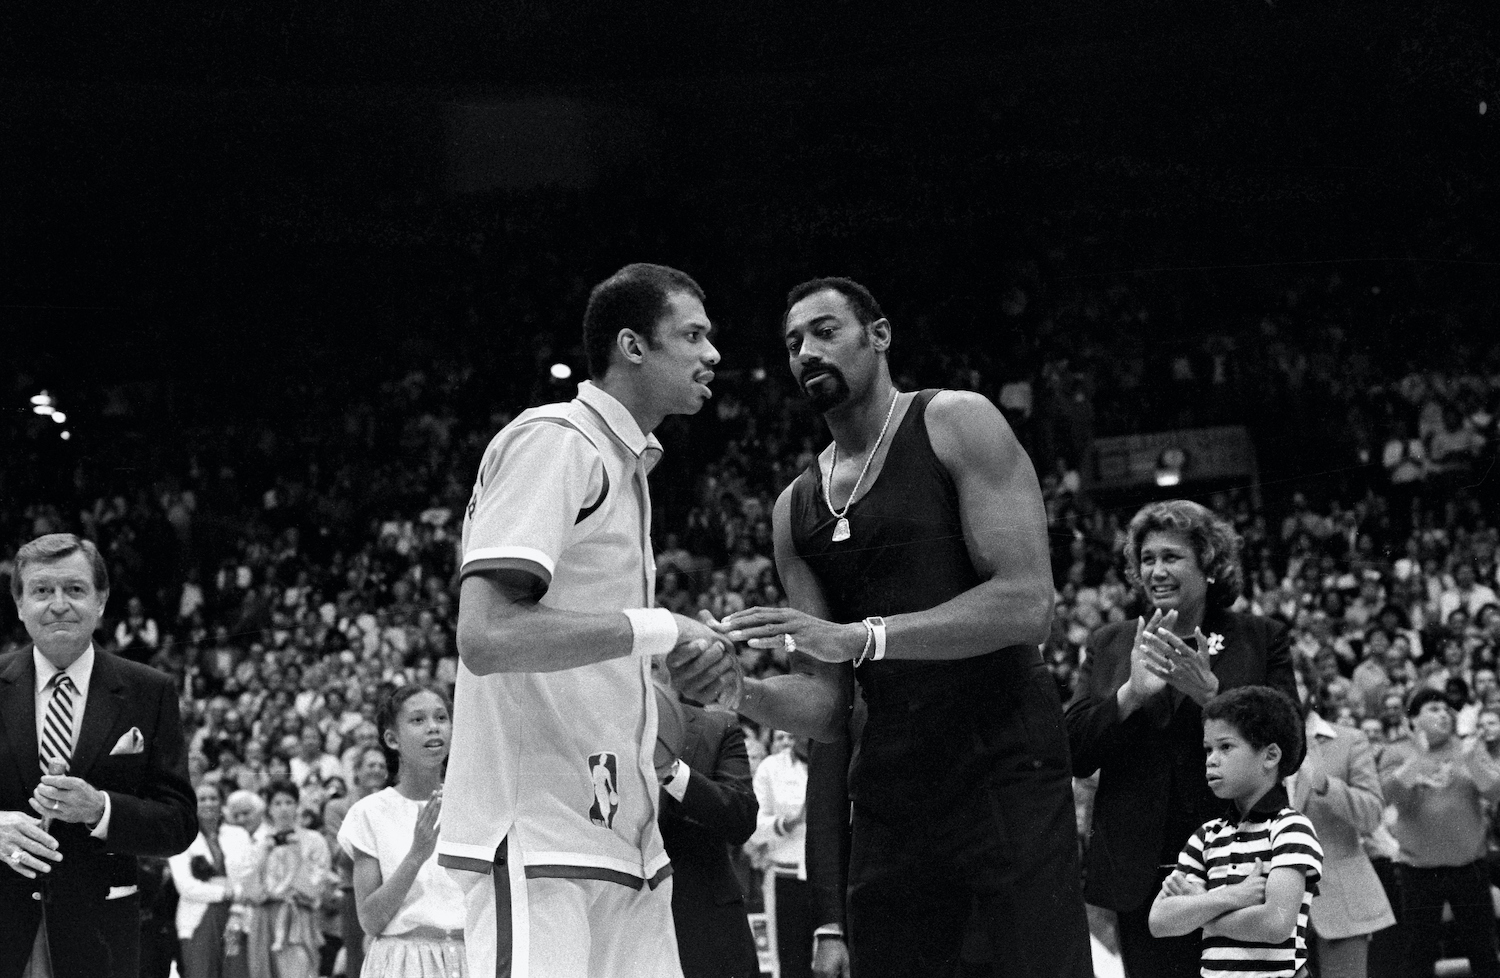 Wilt Chamberlain (R) and Kareem Abdul-Jabbar (L) exchange words ahead of a Los Angeles Lakers game.